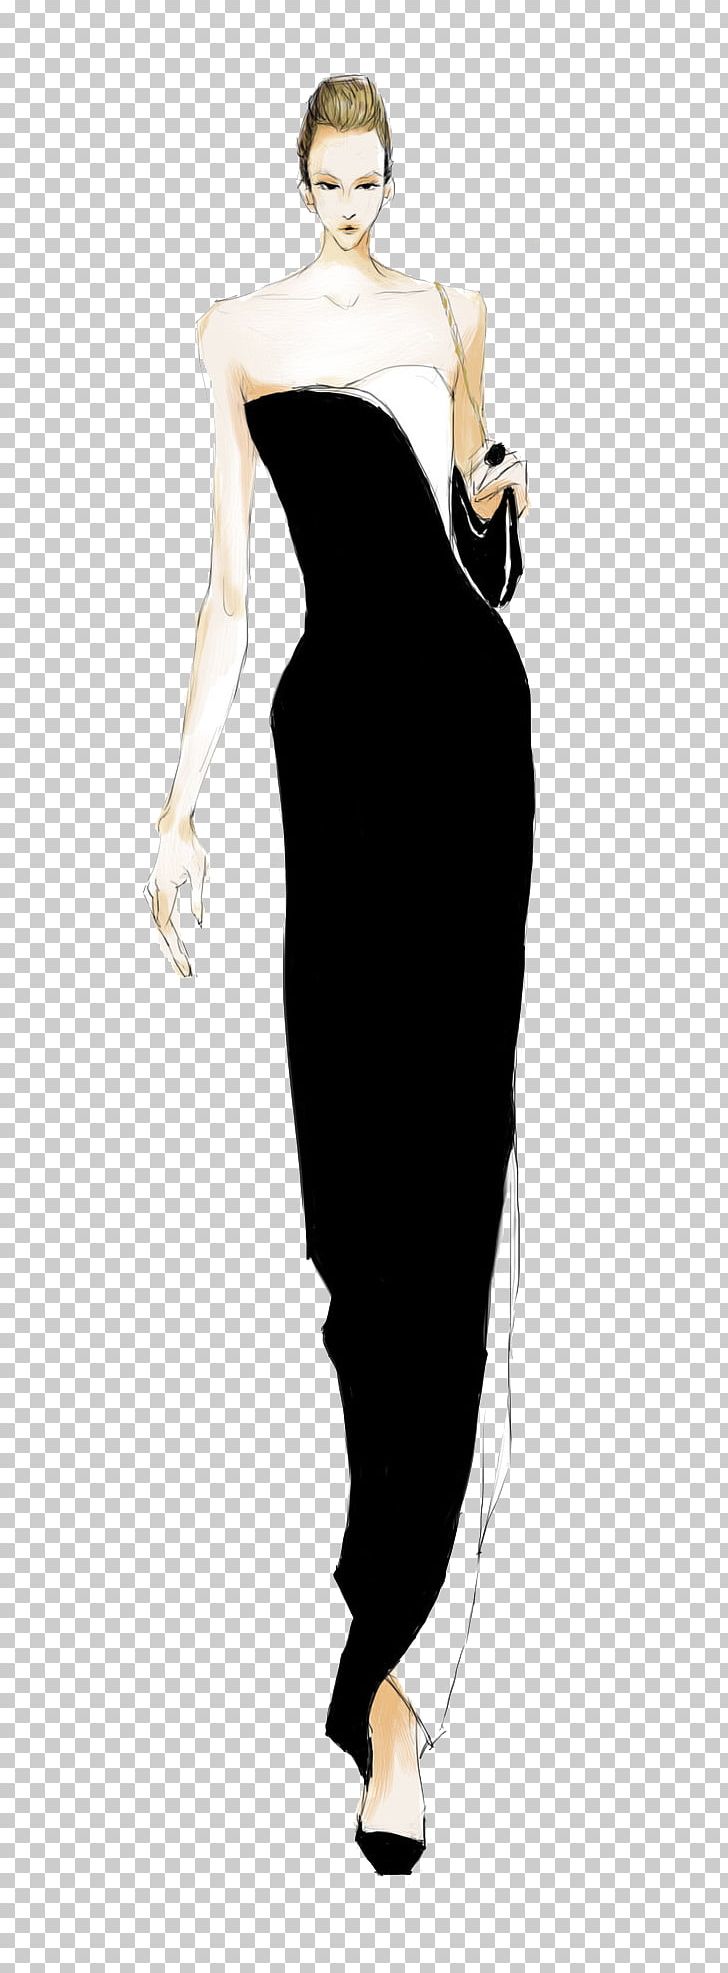 Fashion Design Fashion Illustration Model Drawing PNG, Clipart,  Architecture, Art, Black, Business Woman, Clothing Free PNG